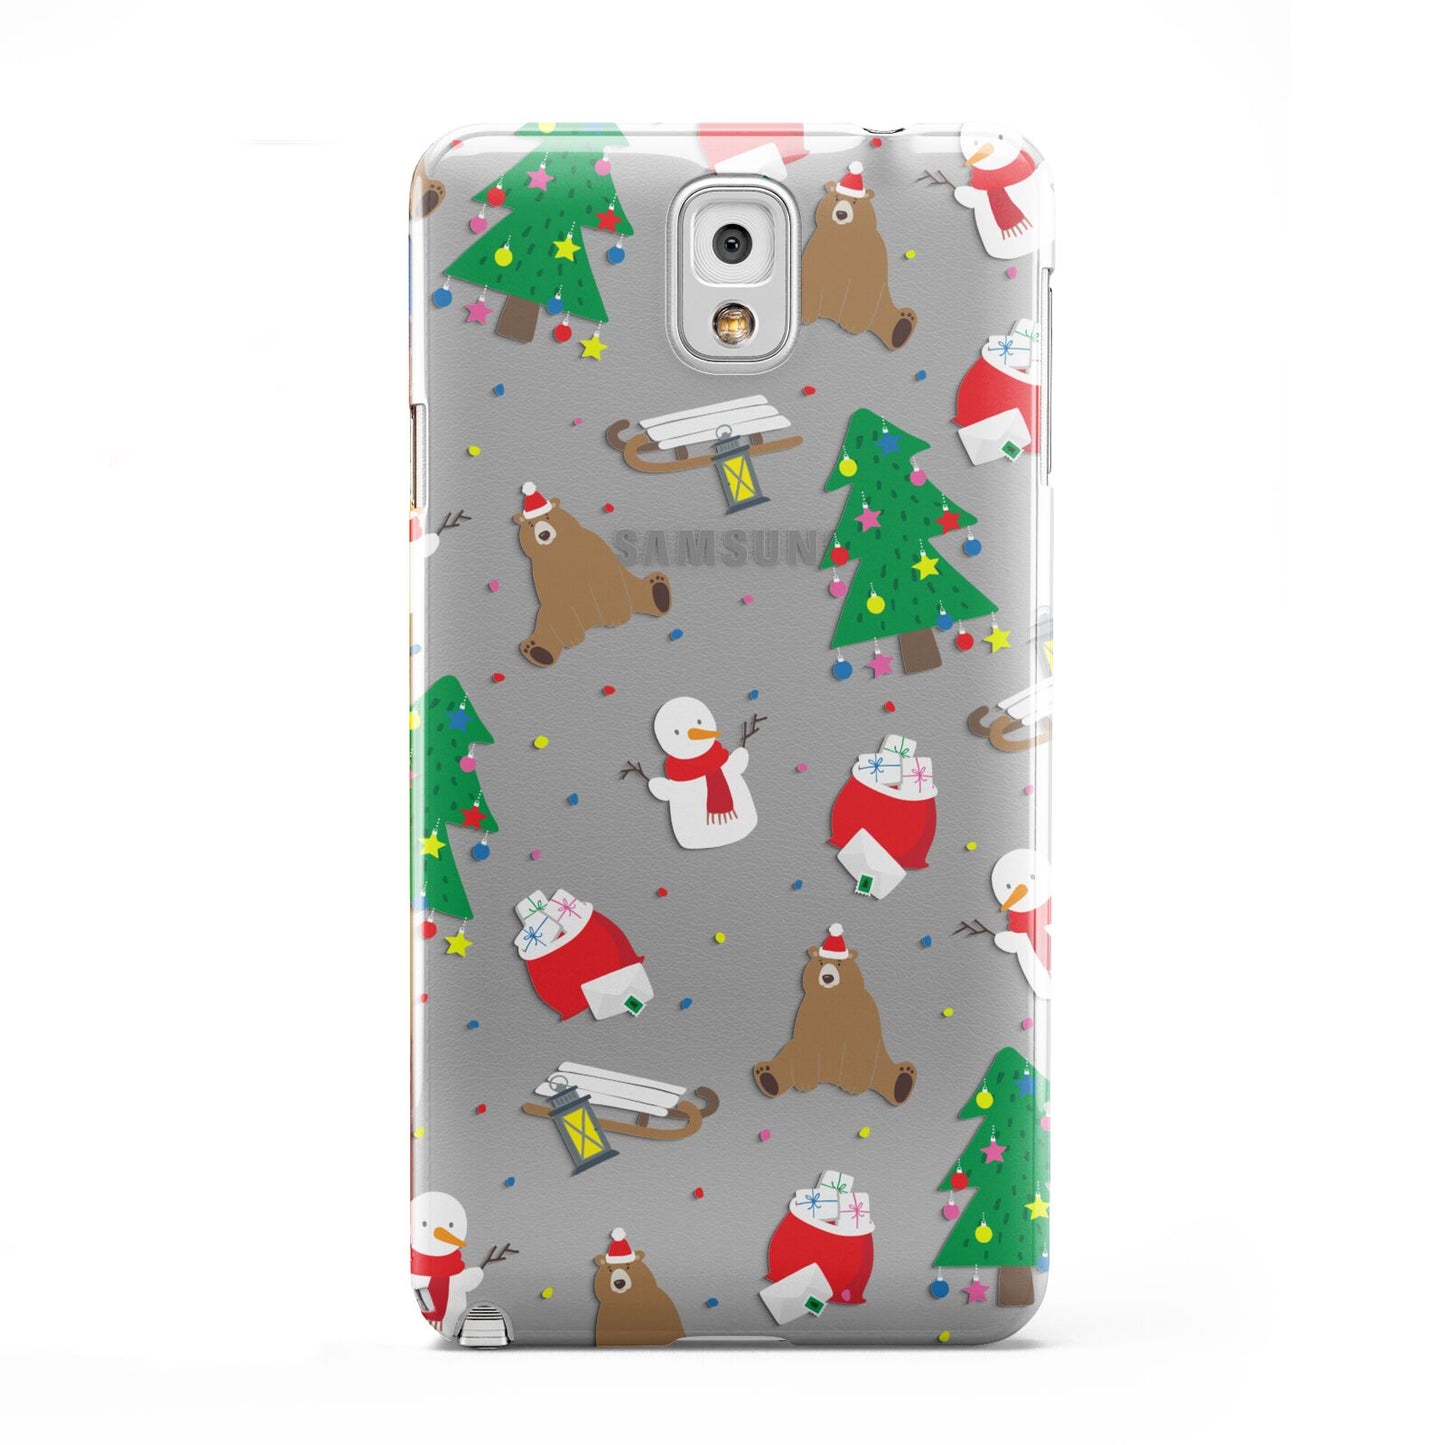 Christmas Clear Samsung Galaxy Note 3 Case